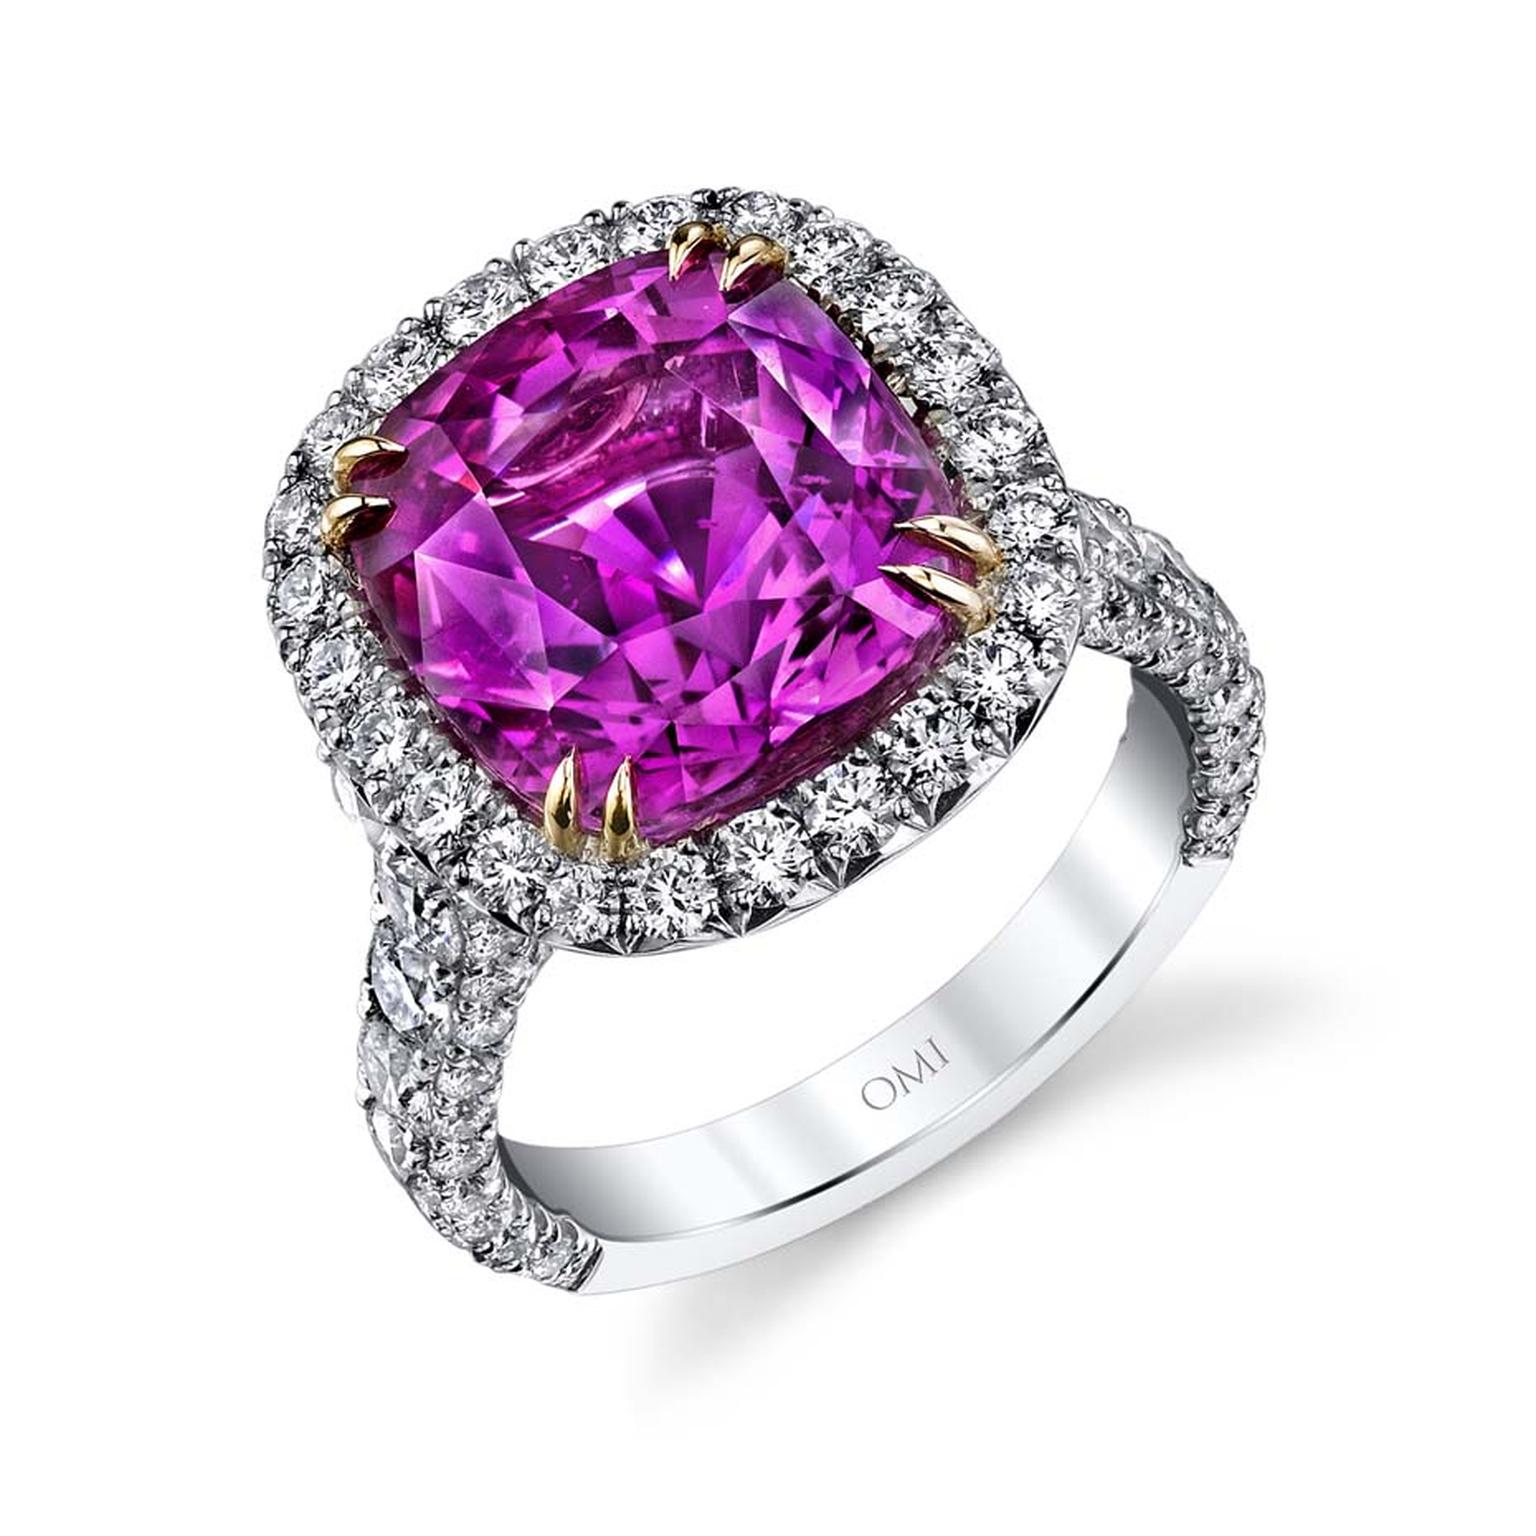 Omi Privé one-of-a-kind pink sapphire and diamond ring